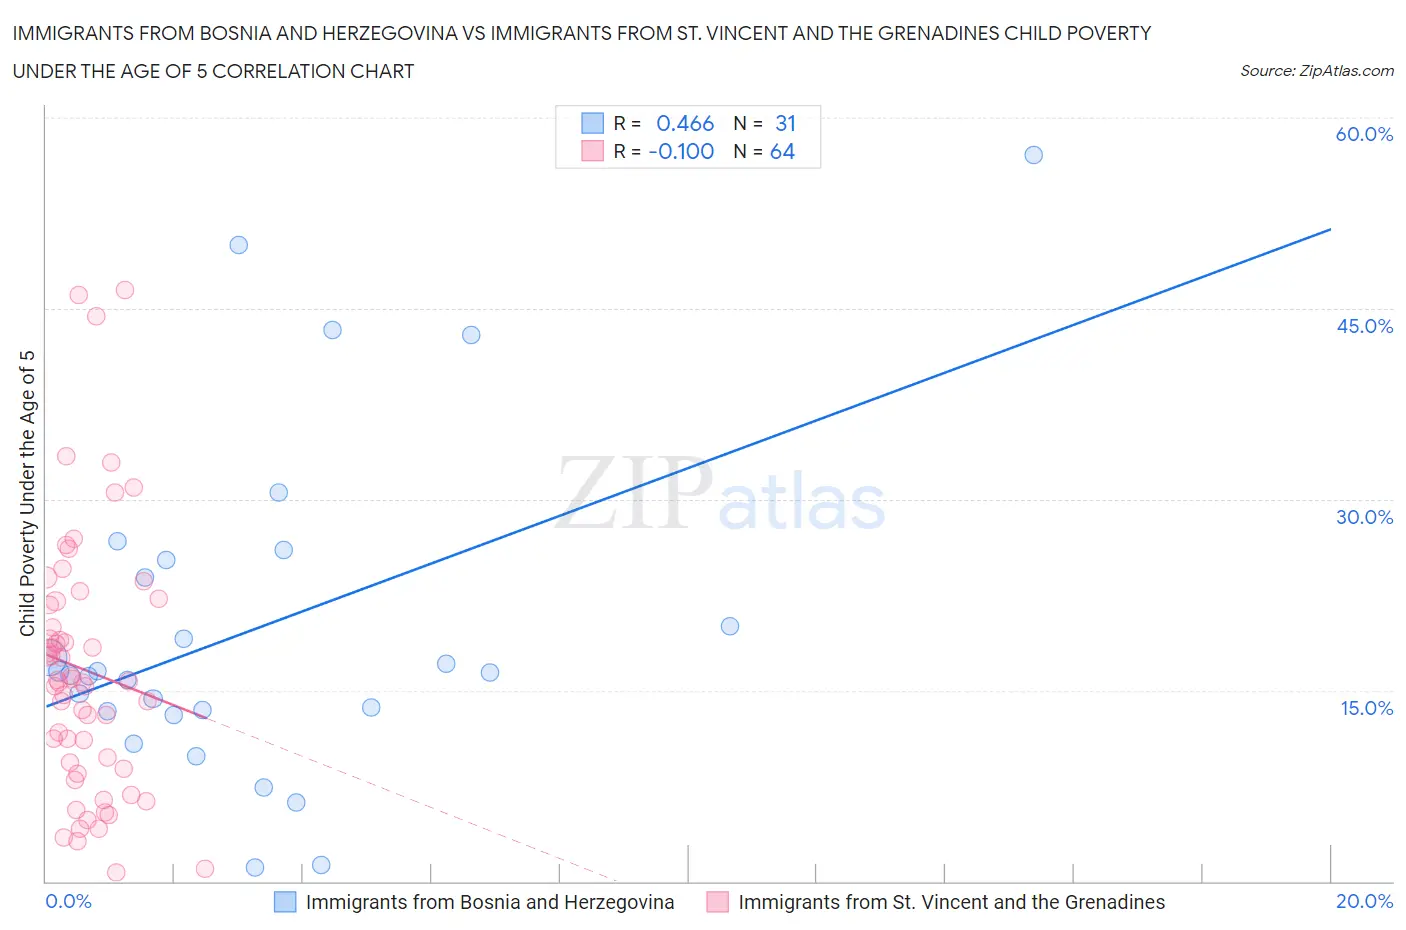 Immigrants from Bosnia and Herzegovina vs Immigrants from St. Vincent and the Grenadines Child Poverty Under the Age of 5